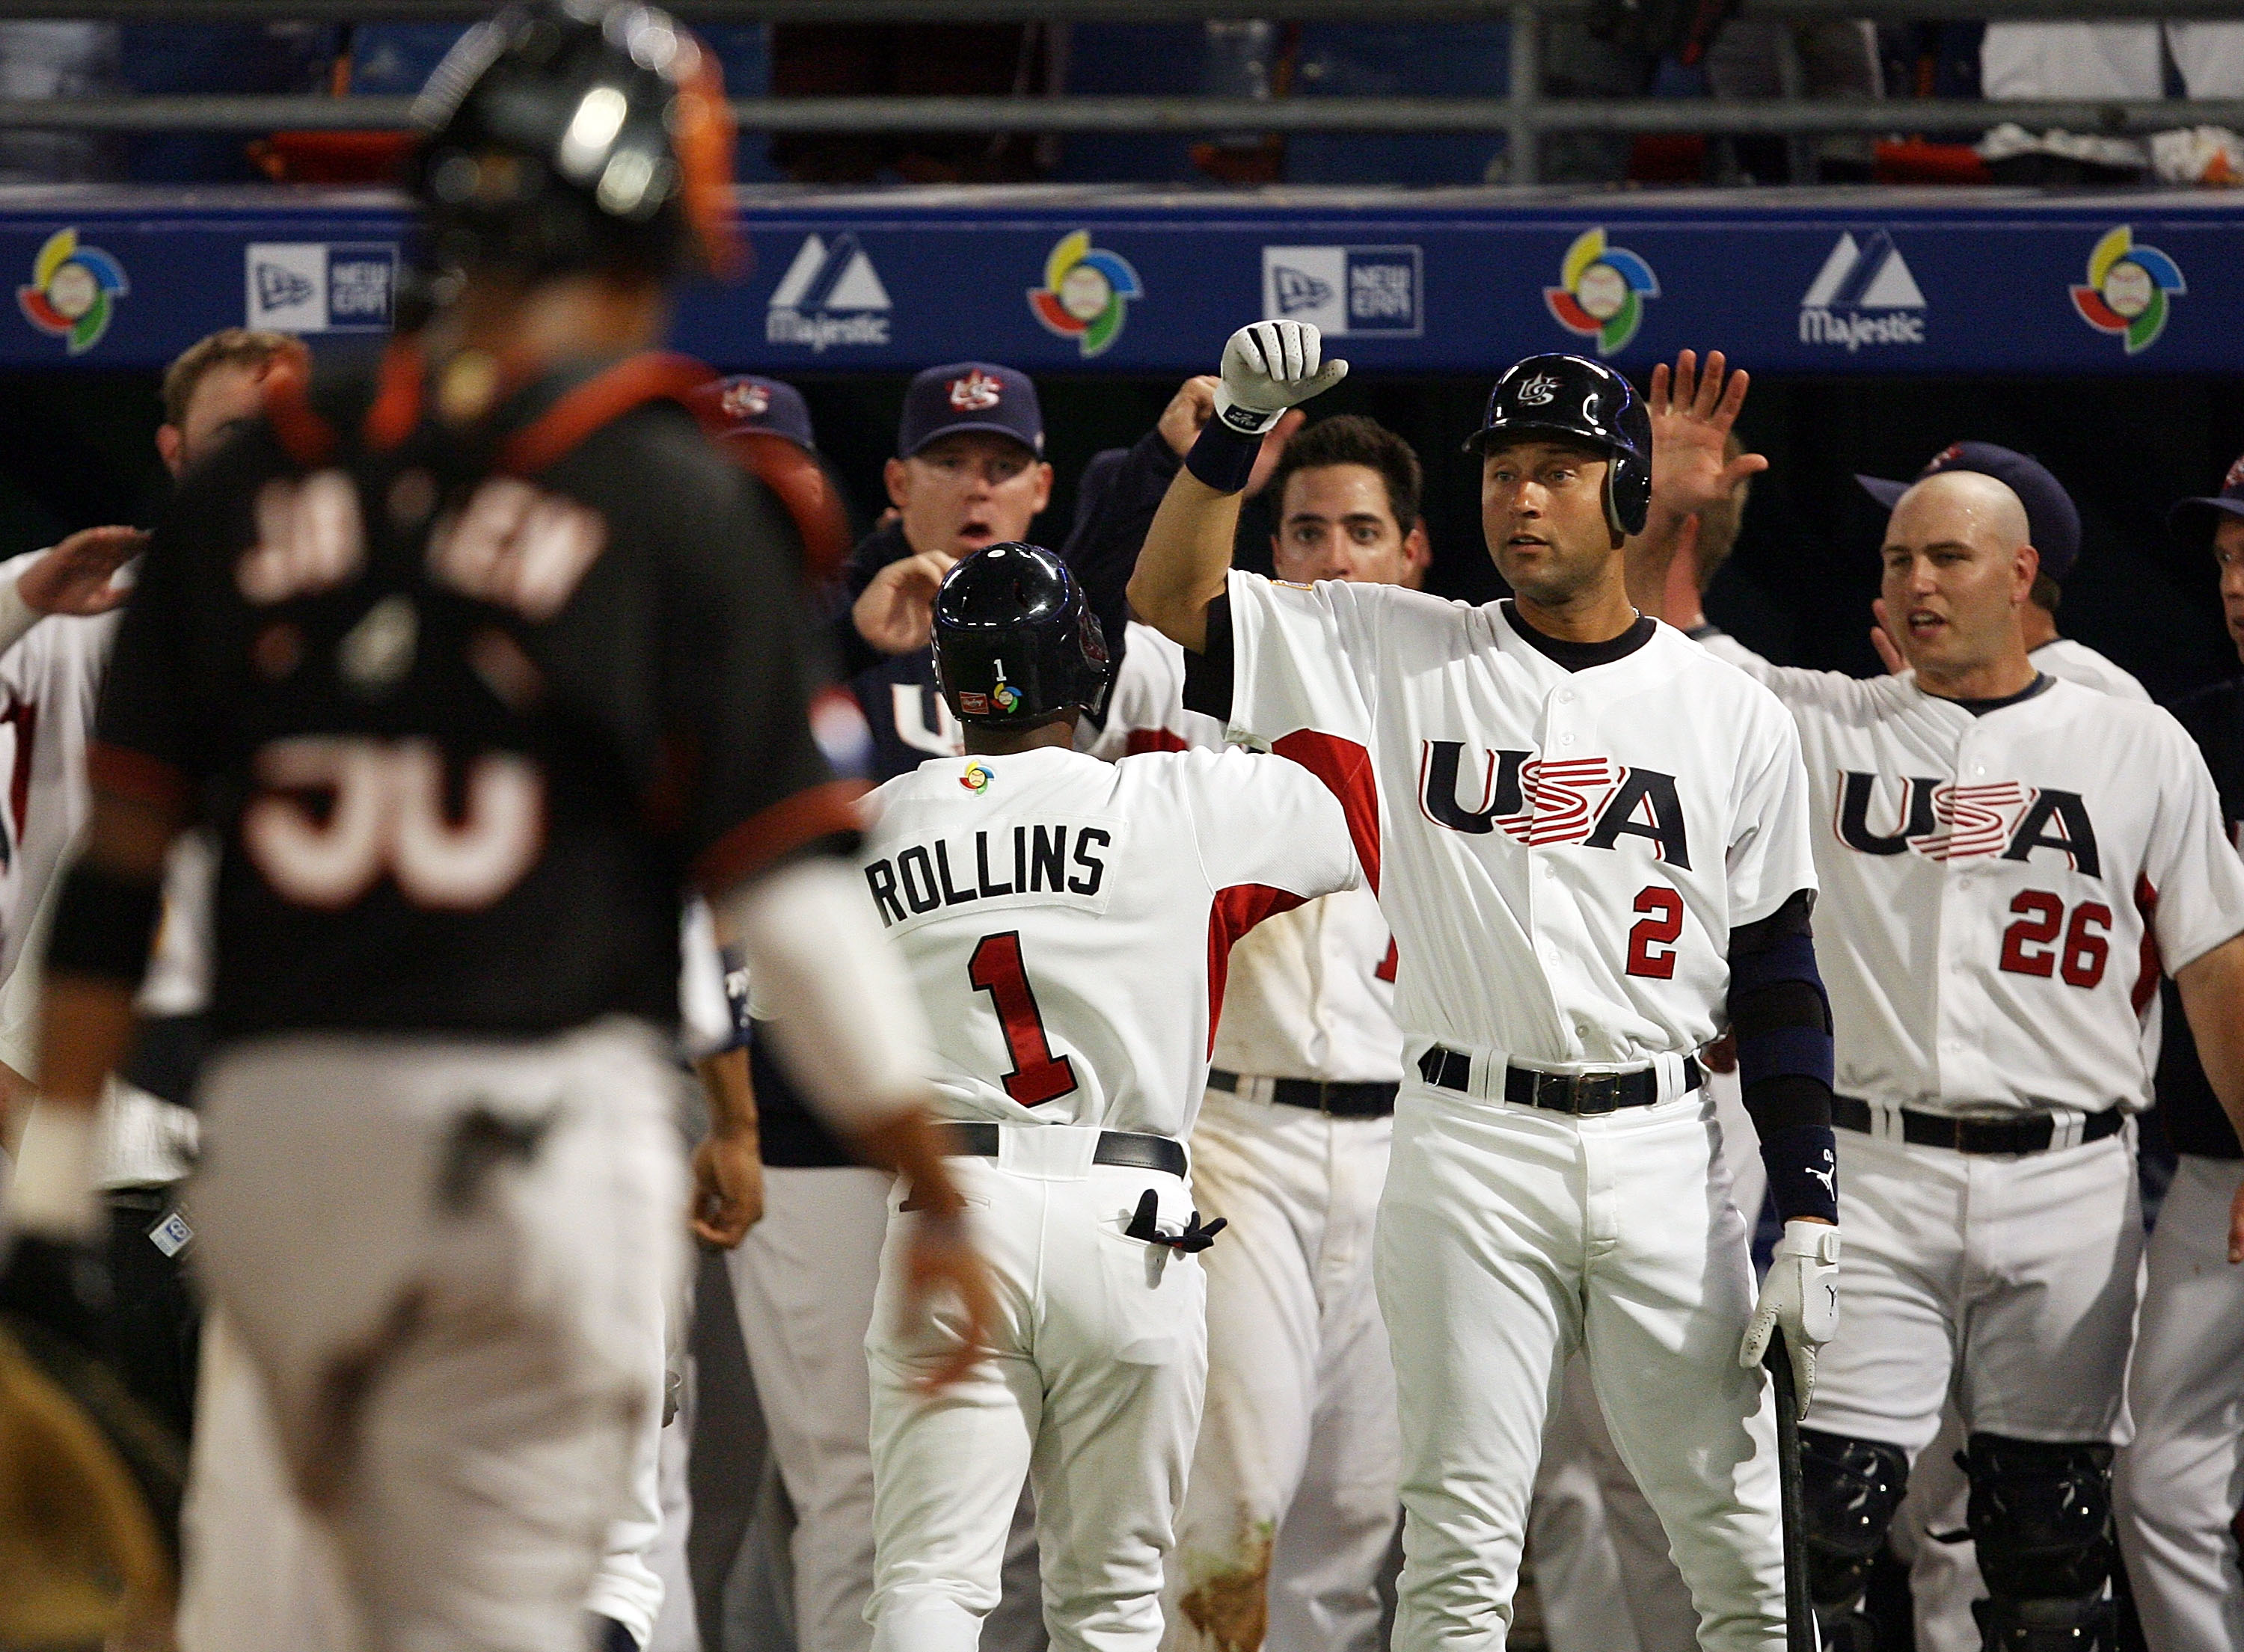 Jimmy Rollins is congratulated by Derek Jeter after hitting a two-run home run during the 2009 WBC.  (Photo by Doug Benc/Getty Images)